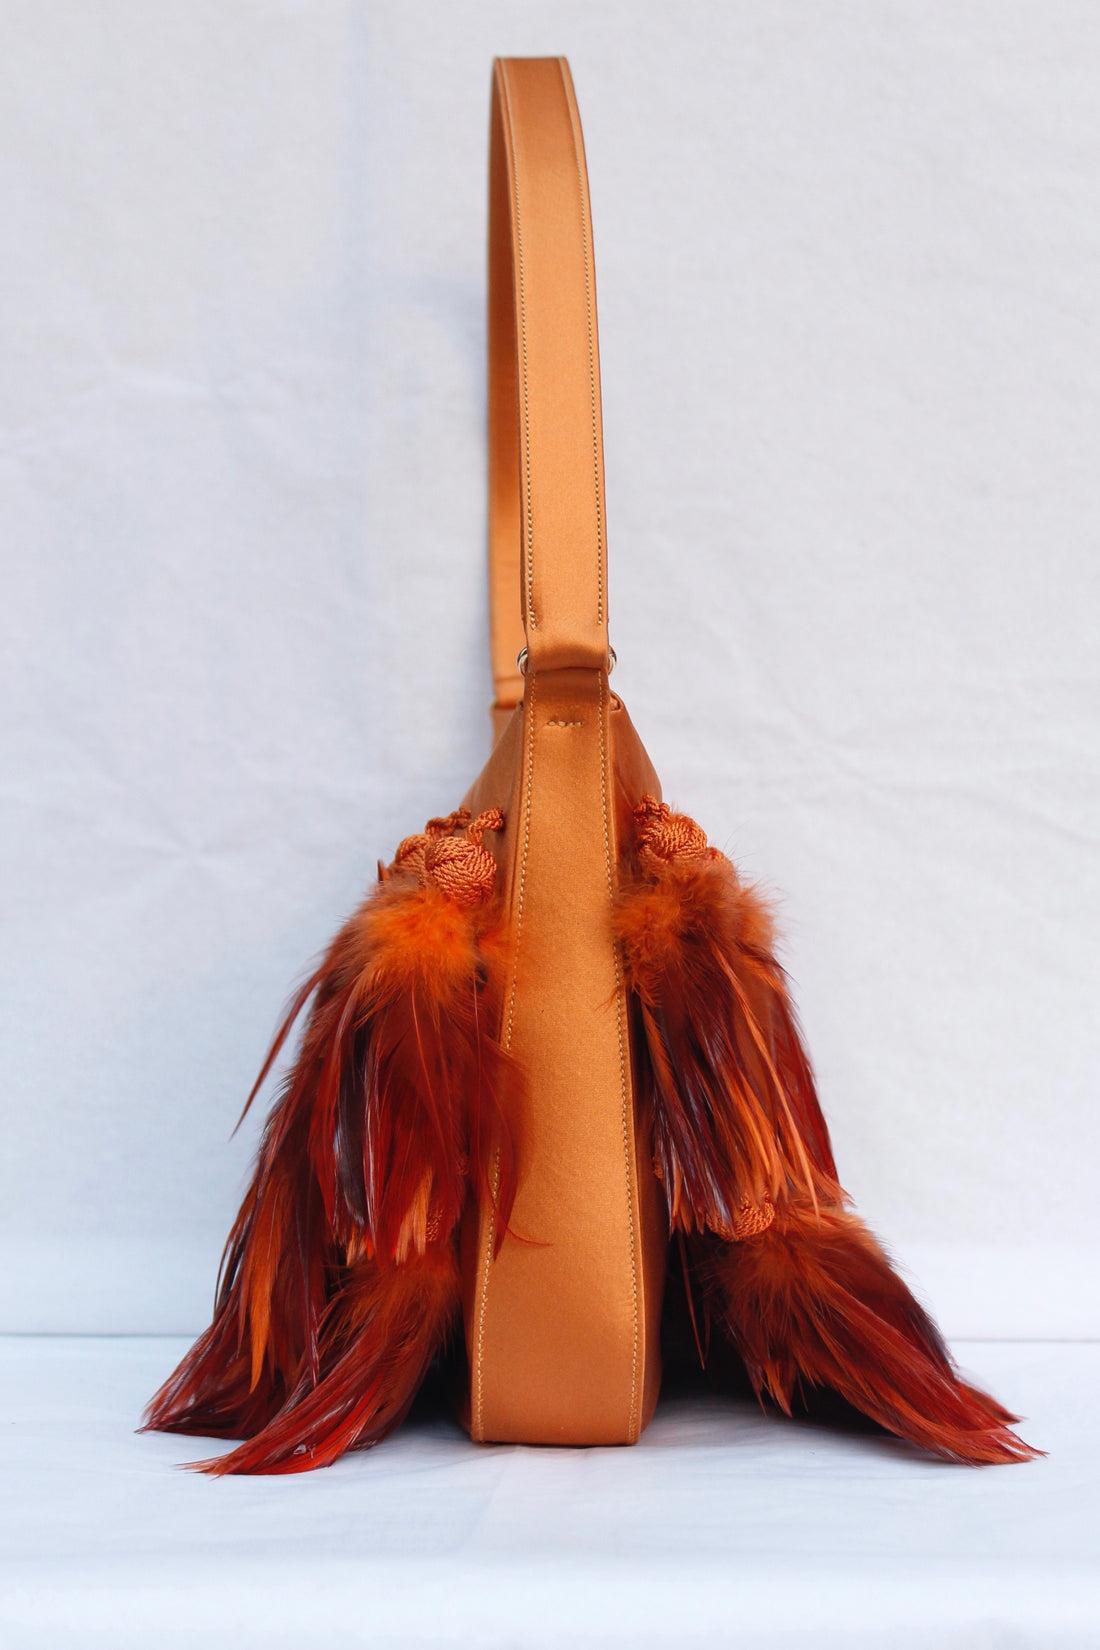 Renaud Pellegrino (Made in France) Orange satin bag with feathers, lined with orange satin.

Additional information: 
Dimensions: Height: 21 cm (8.26 in), Width: 22 cm (8.66 in), Depth: 4 cm (1.53 in), Handle: 50 cm (19.68 in)
Condition: Very good